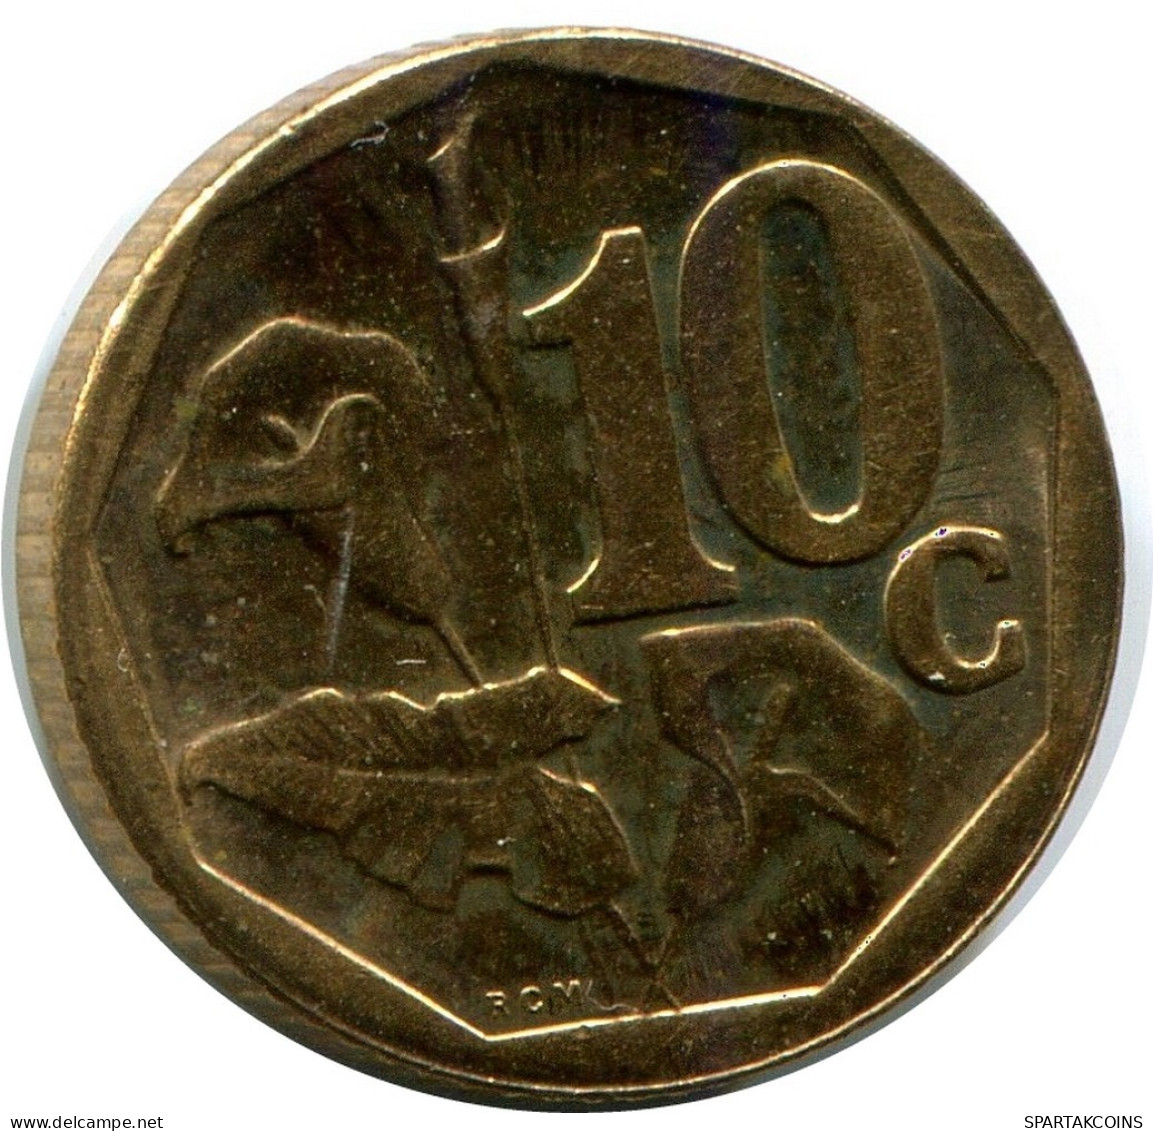 10 CENTS 2009 SOUTH AFRICA Coin #AP939.U.A - Sud Africa